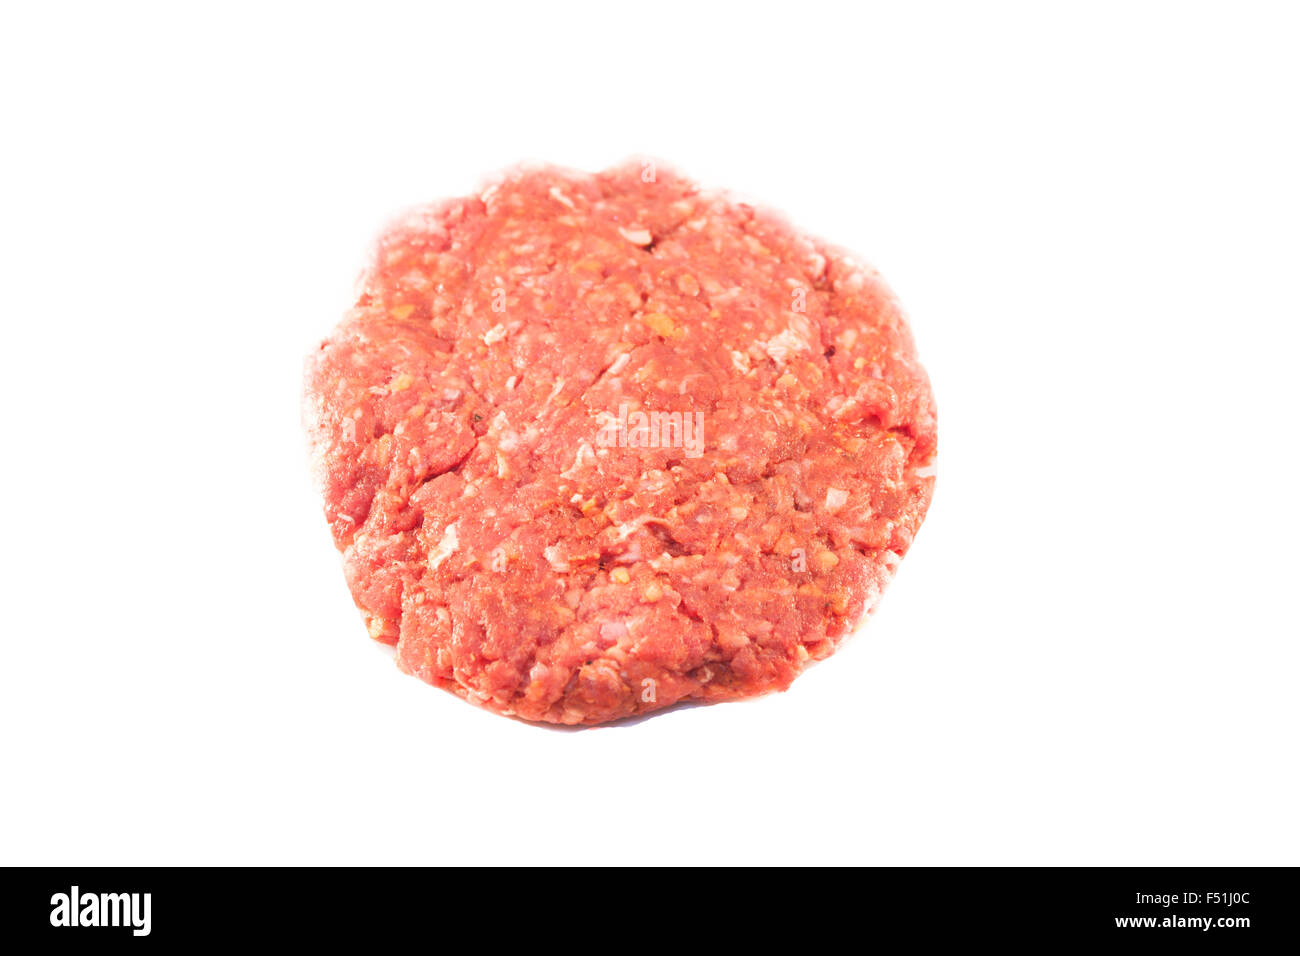 A raw burger beef made of beef minced meat, isolated on white background Stock Photo